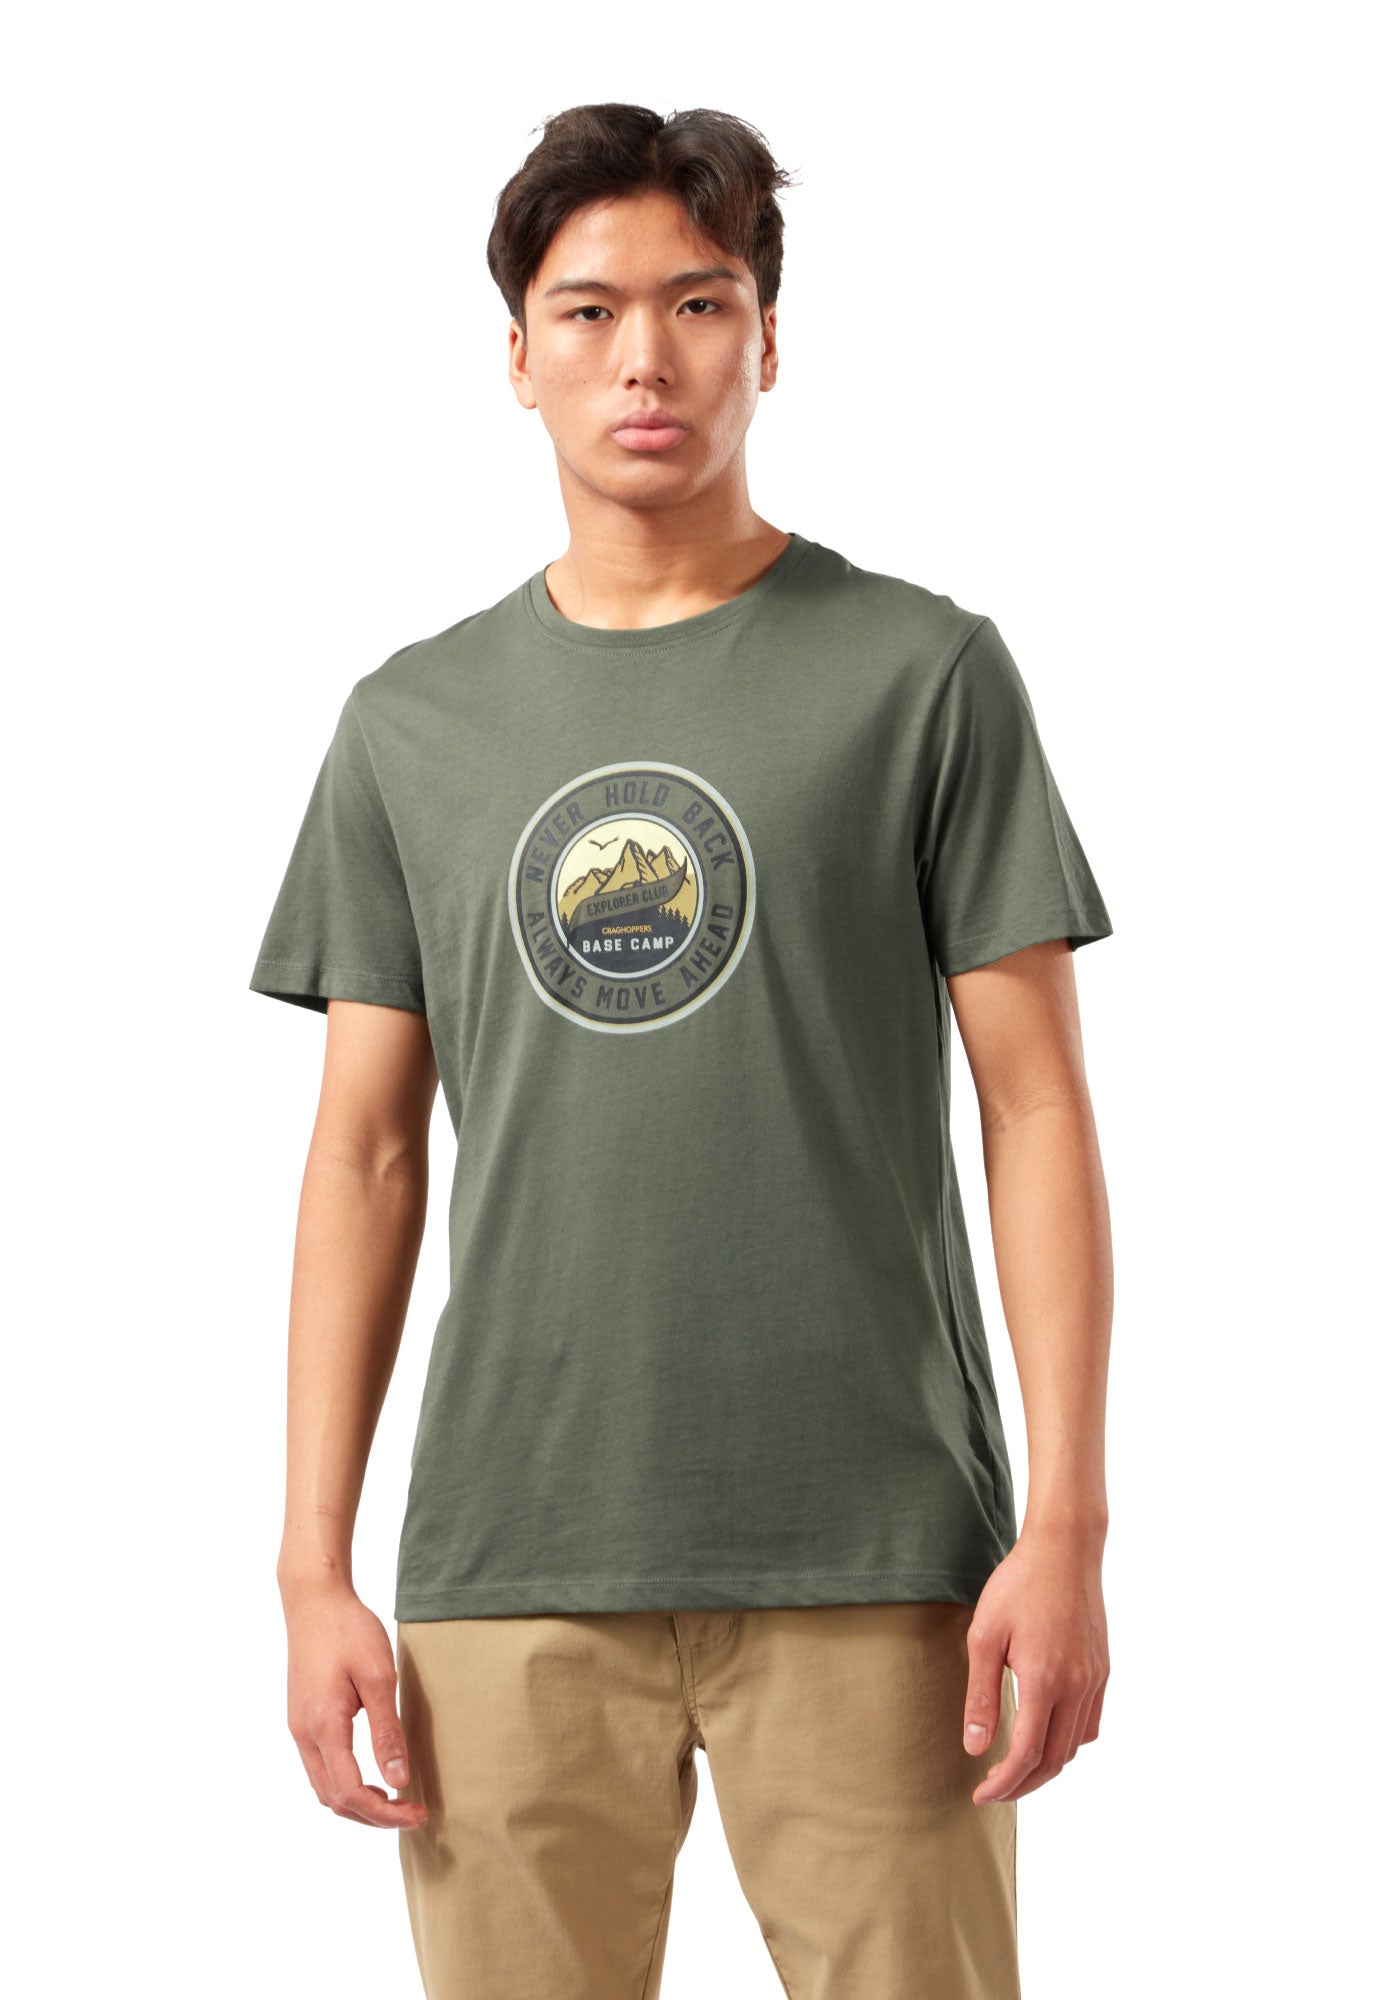 Parka Green Mightie Short Sleeve Cotton T-Shirt by Craghoppers 